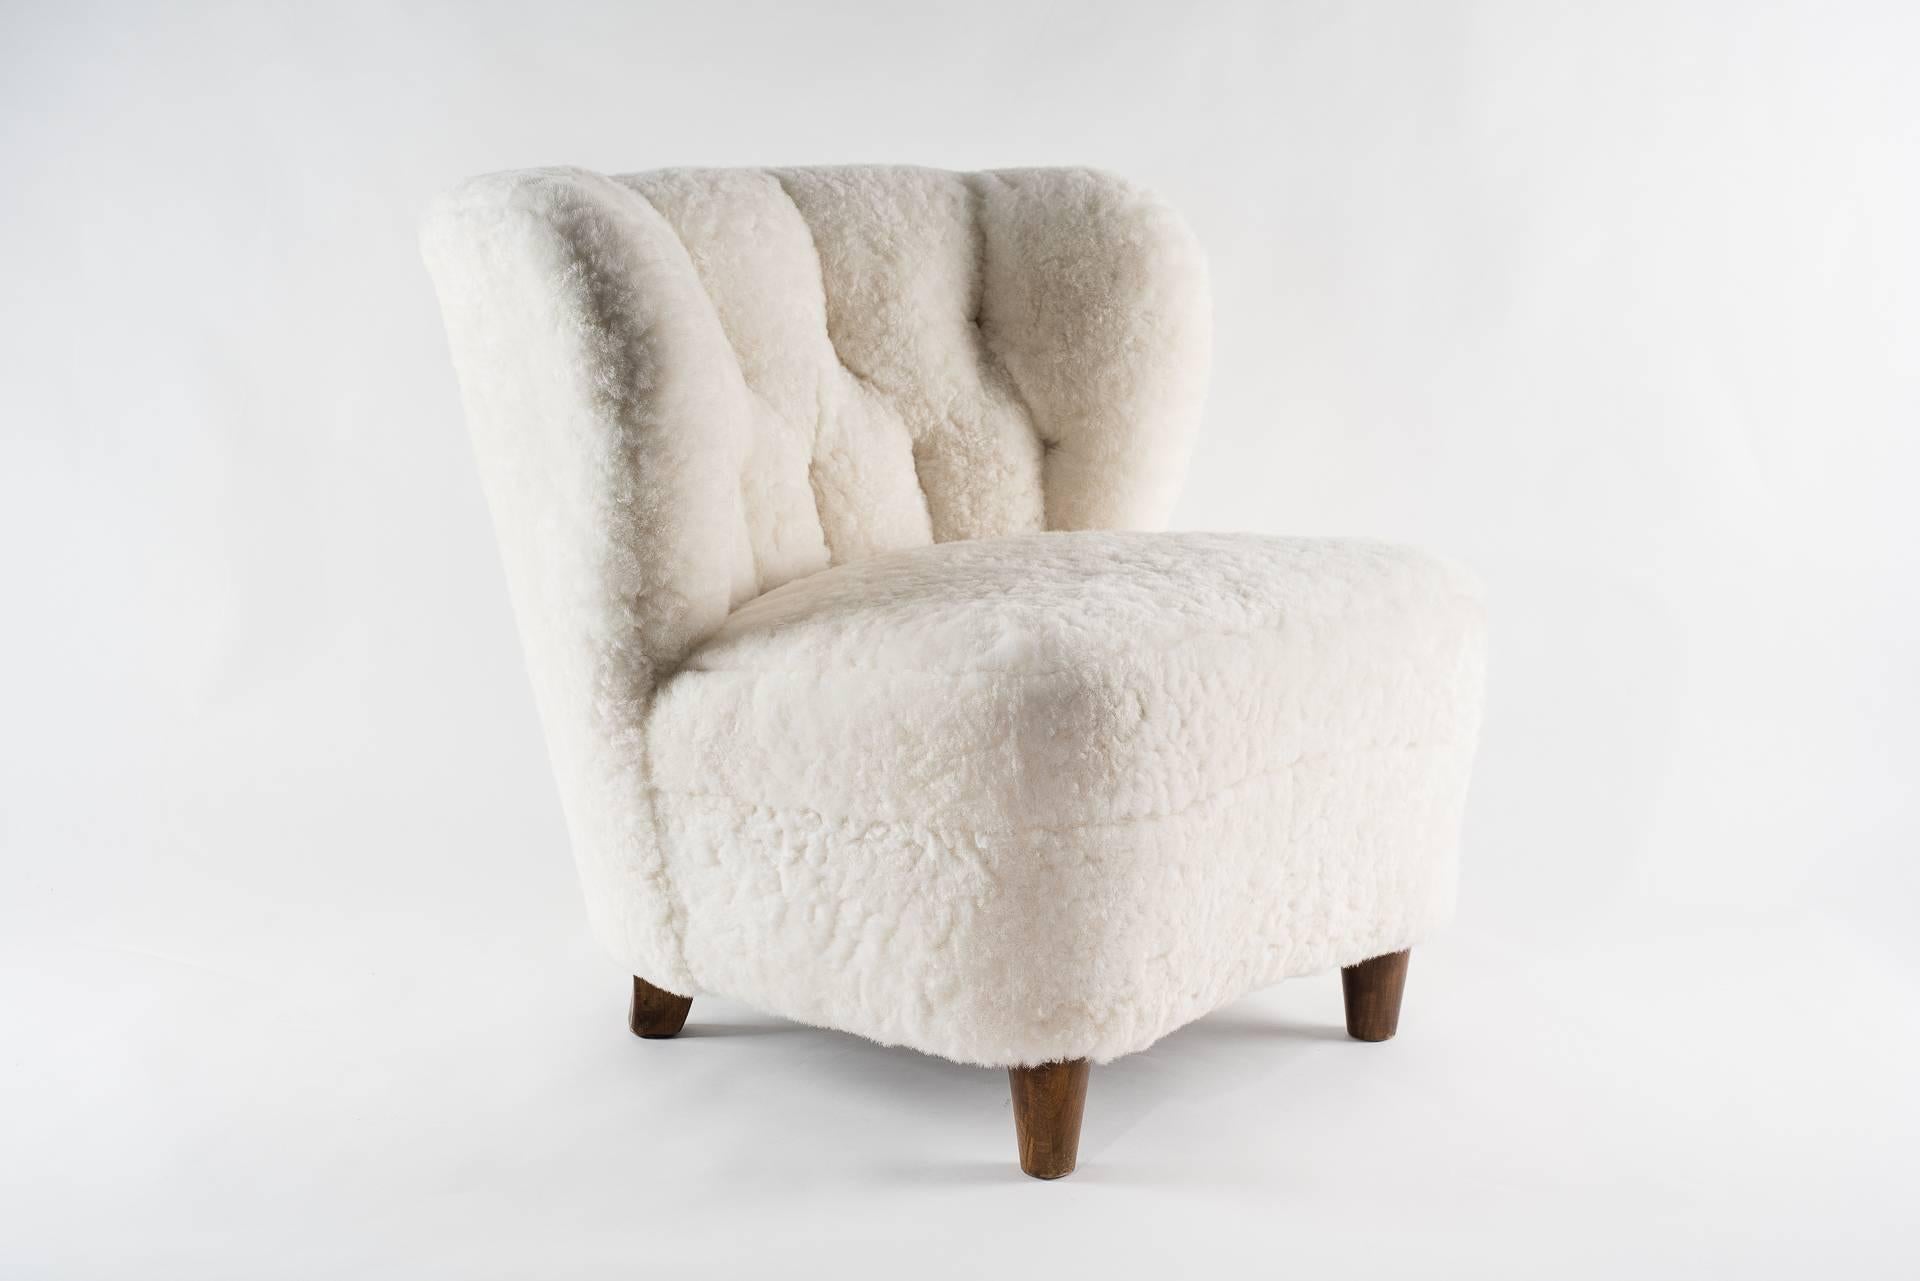 Fabulous Scandinavian vintage armchair, circa 1900
Natural white lambskin upholstery.
Perfectly refinished and newly upholstered.